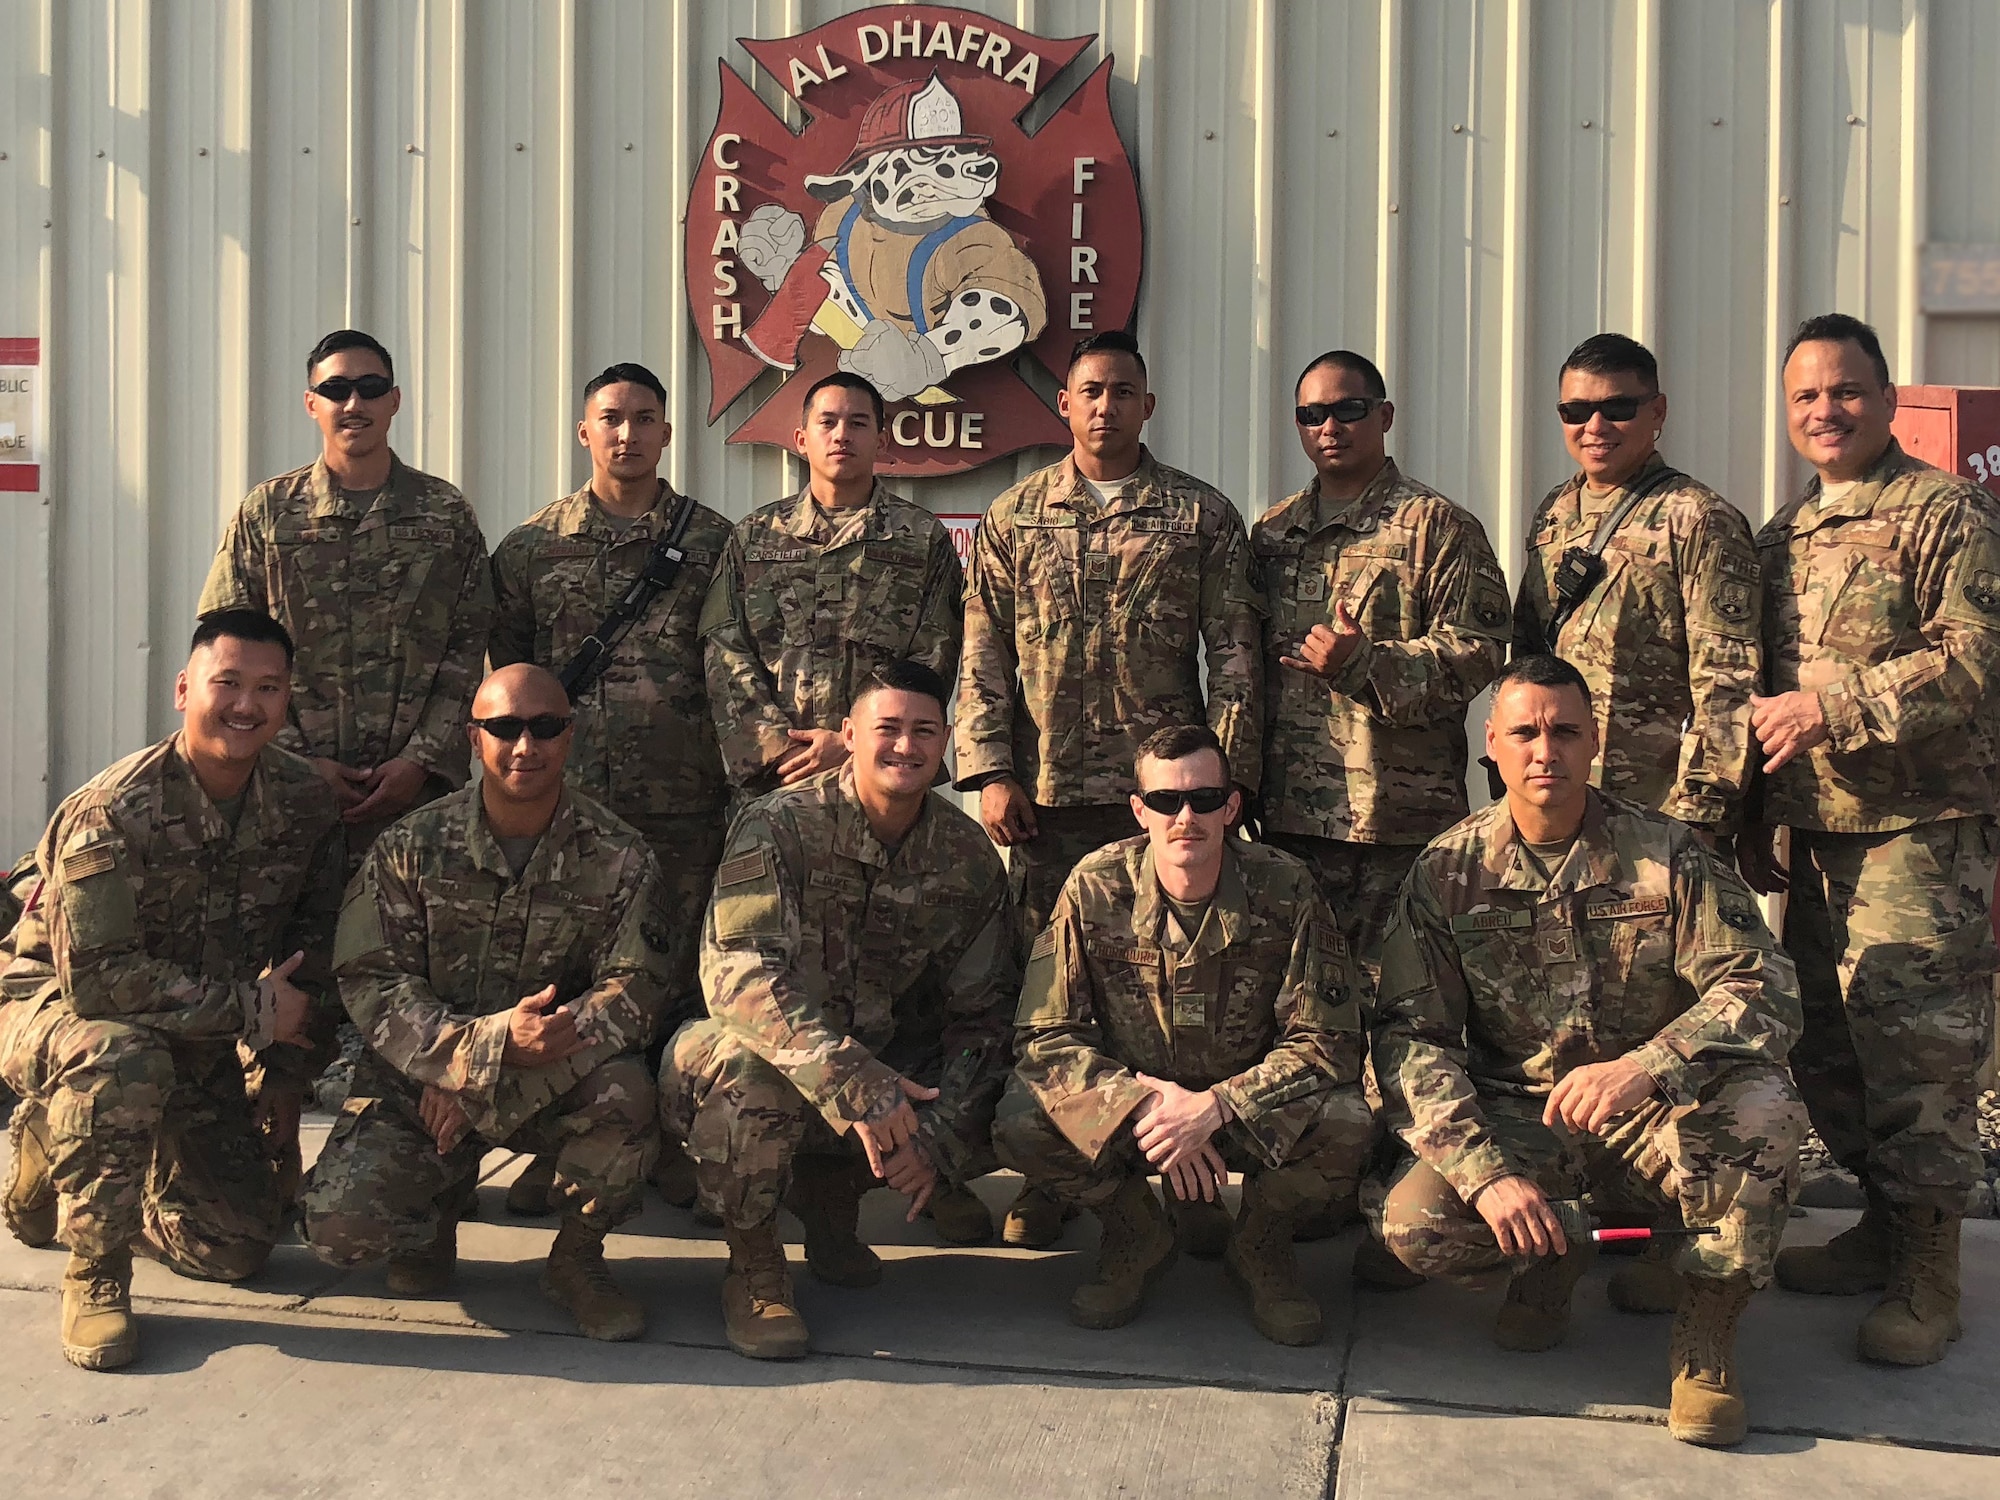 The 380th Expeditionary Civil Engineer Squadron firefighters take a group photo Dec. 24, 2018 at Al Dhafra Air Base, United Arab Emirates.